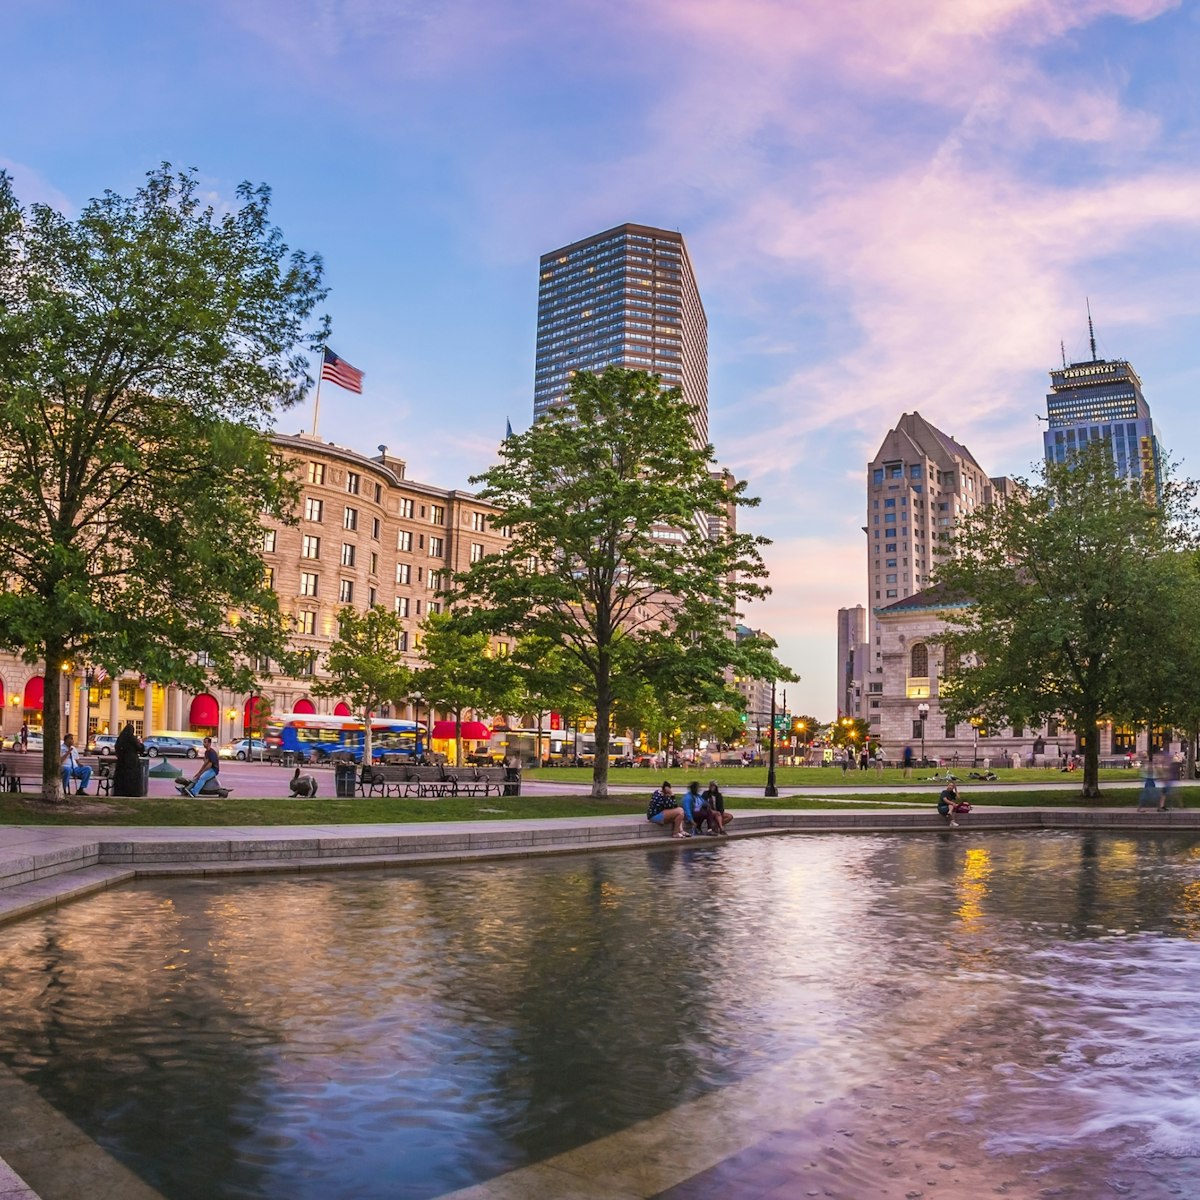 500px Photo ID: 93262895 - Panoramic view of the Copley Square in Boston, Massachusetts, USA at sunset.